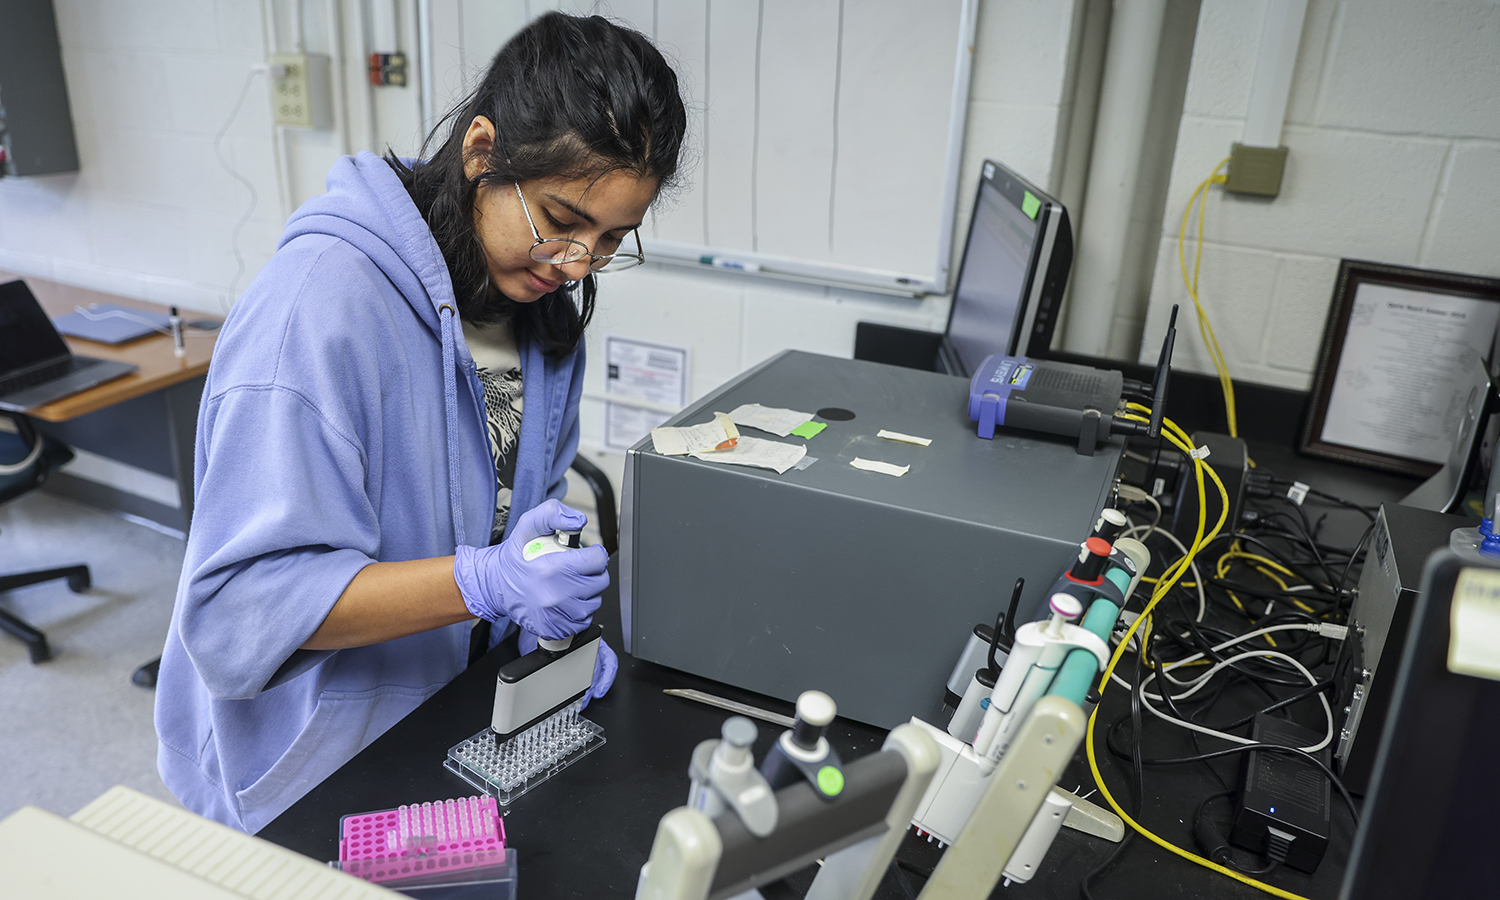 In this special edition of This Week in Photos, we explore the scientific research our students undertake through the mentorship of faculty. This summer, Genesis Rosario ’24 studied the enzyme glutamate dehydrogenase which lies at the branch point of protein and sugar metabolism in our bodies.